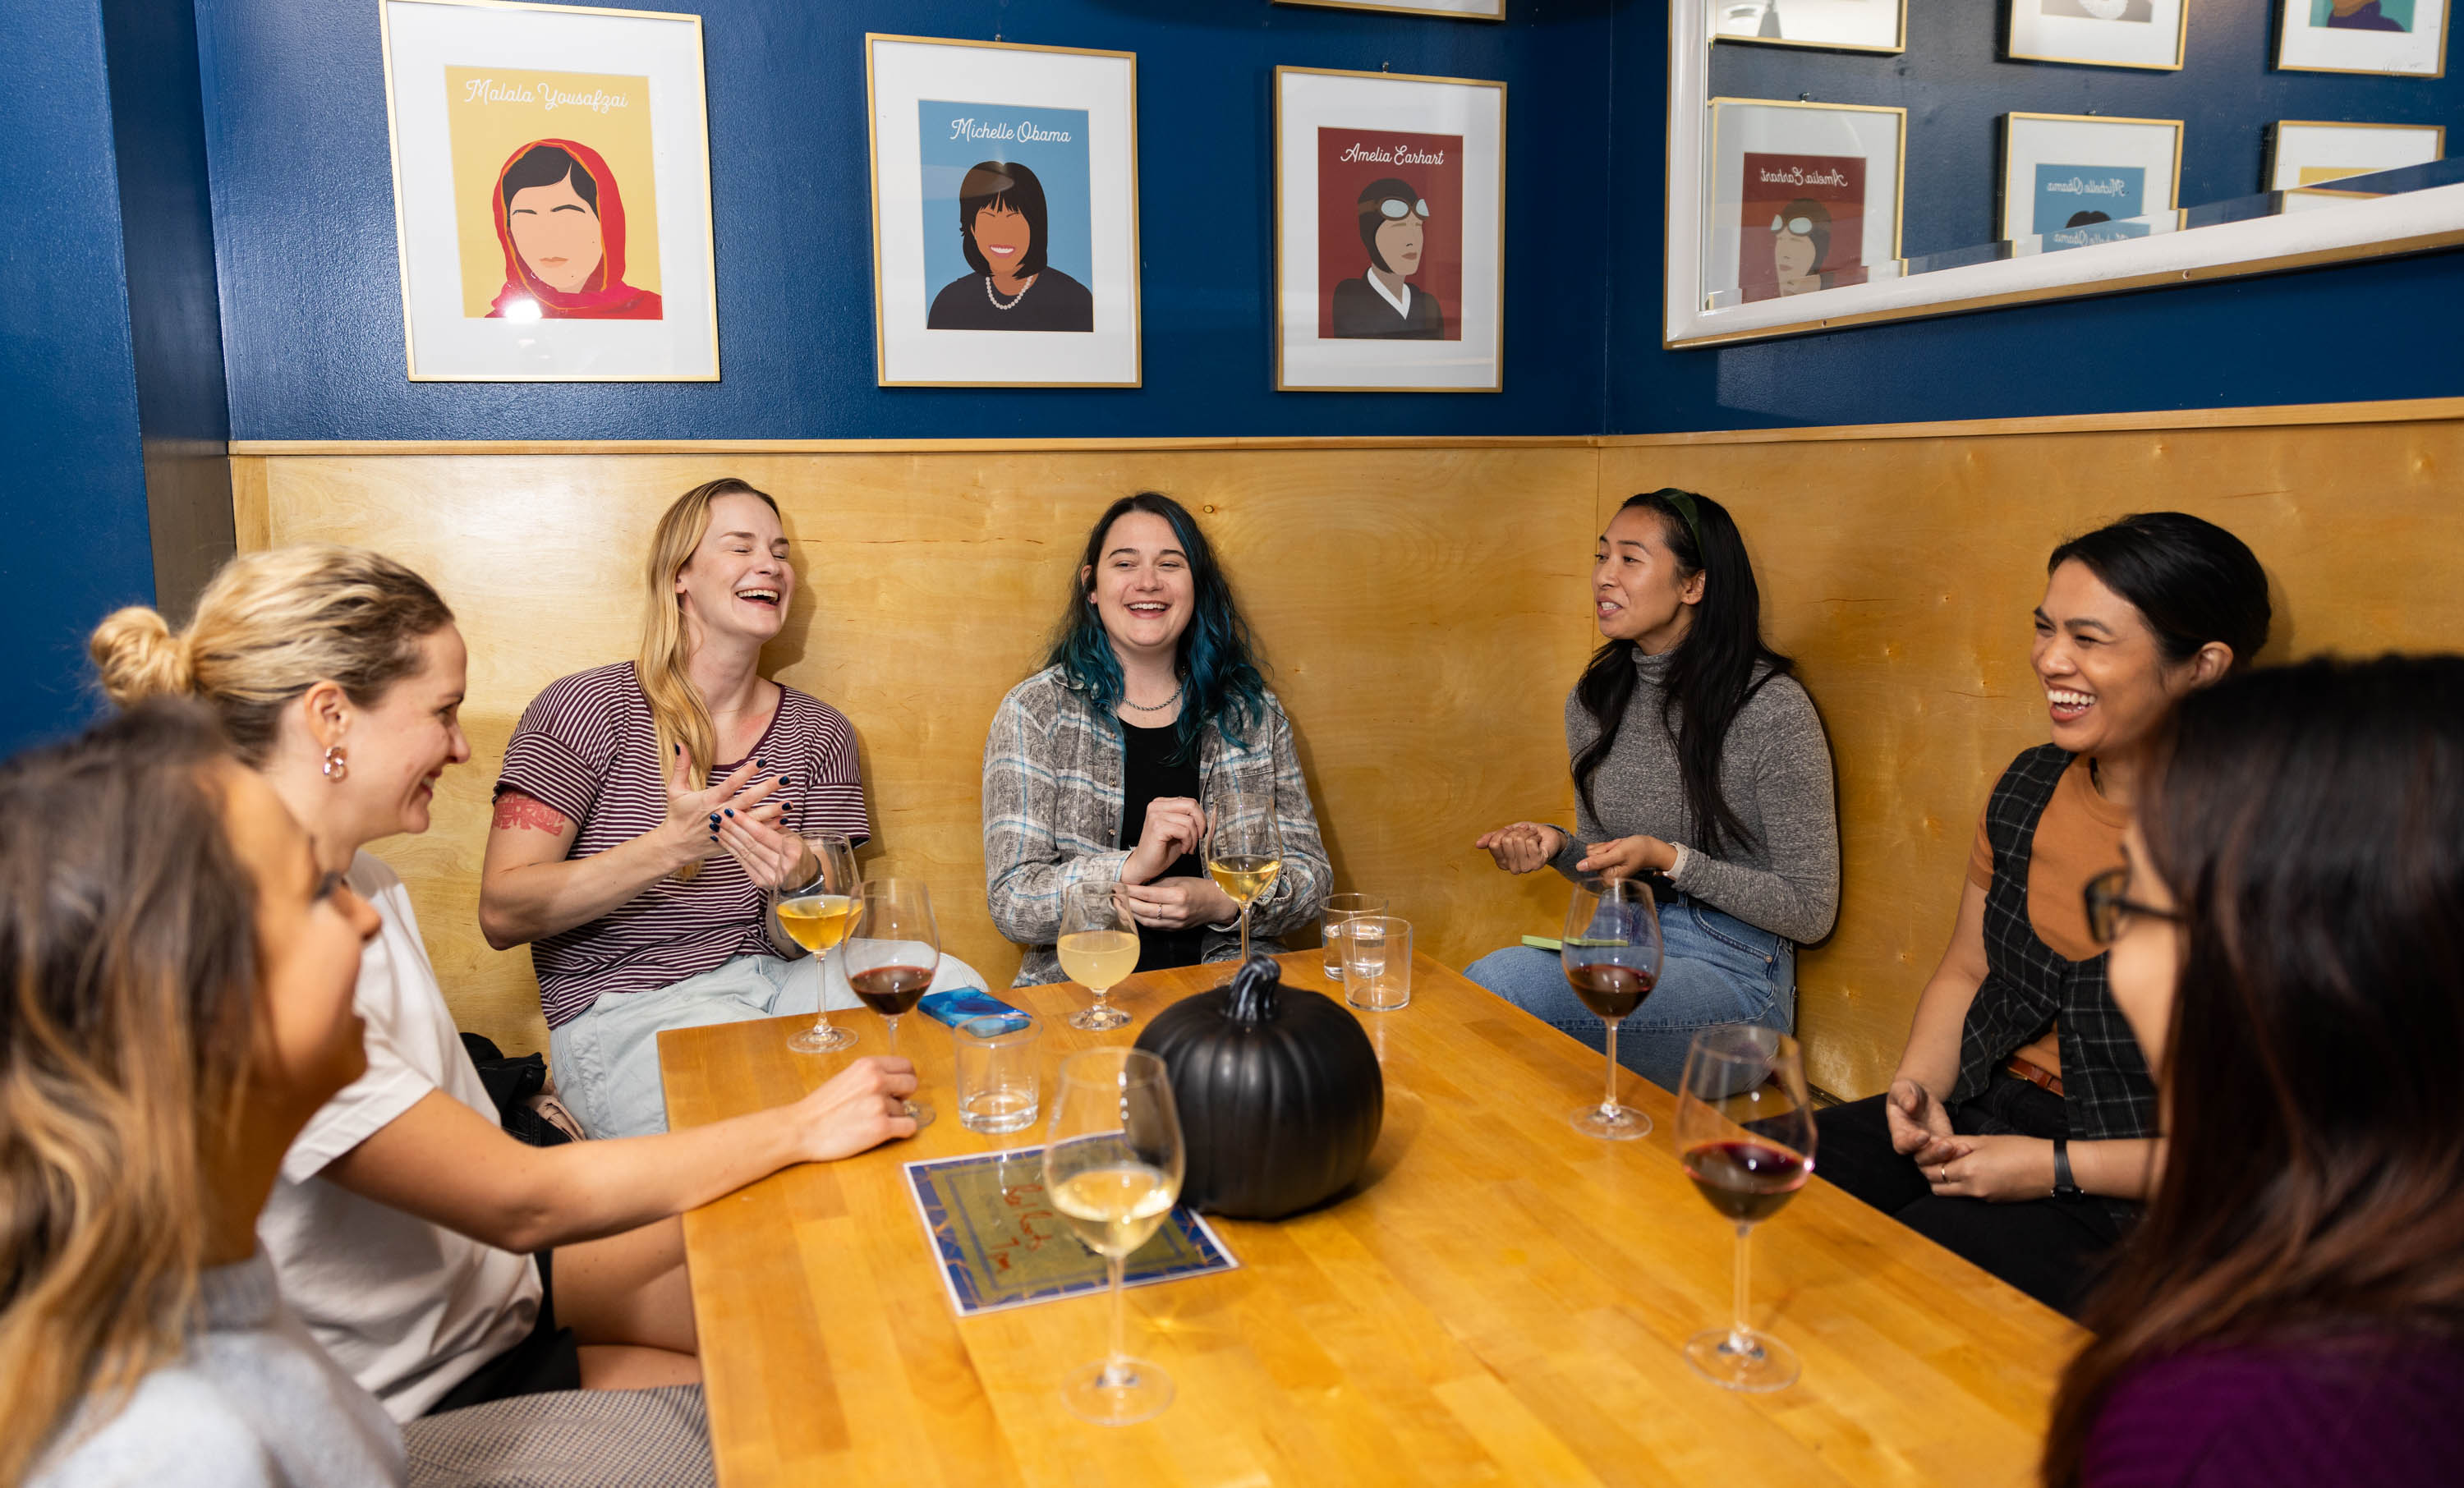 A group of women sit around a table smiling and laughing as wine glasses sit on the table in front of them.